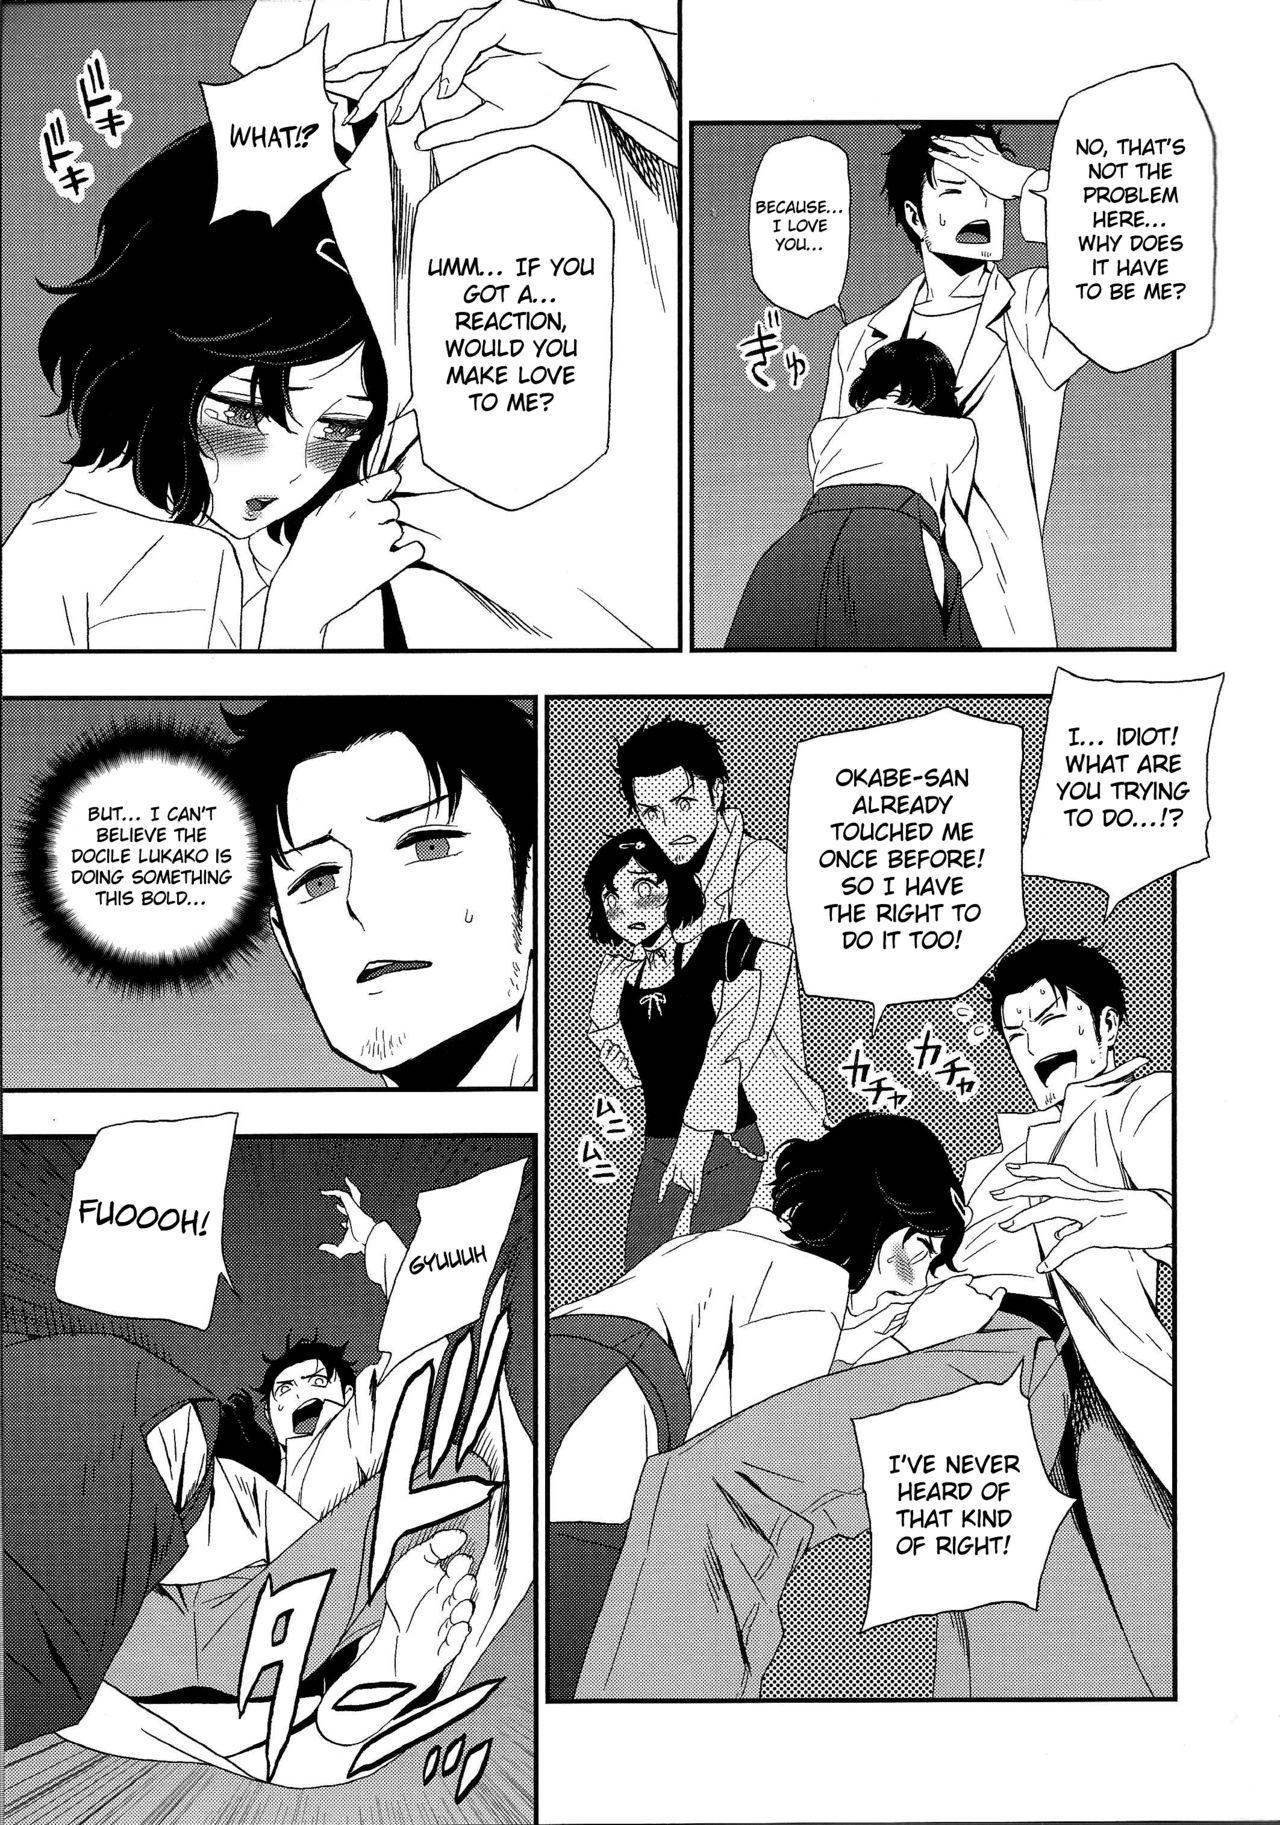 Rough Sex Porn Shiiseishou no Maria | Maria the Thoughtful Saint - Steinsgate Picked Up - Page 7